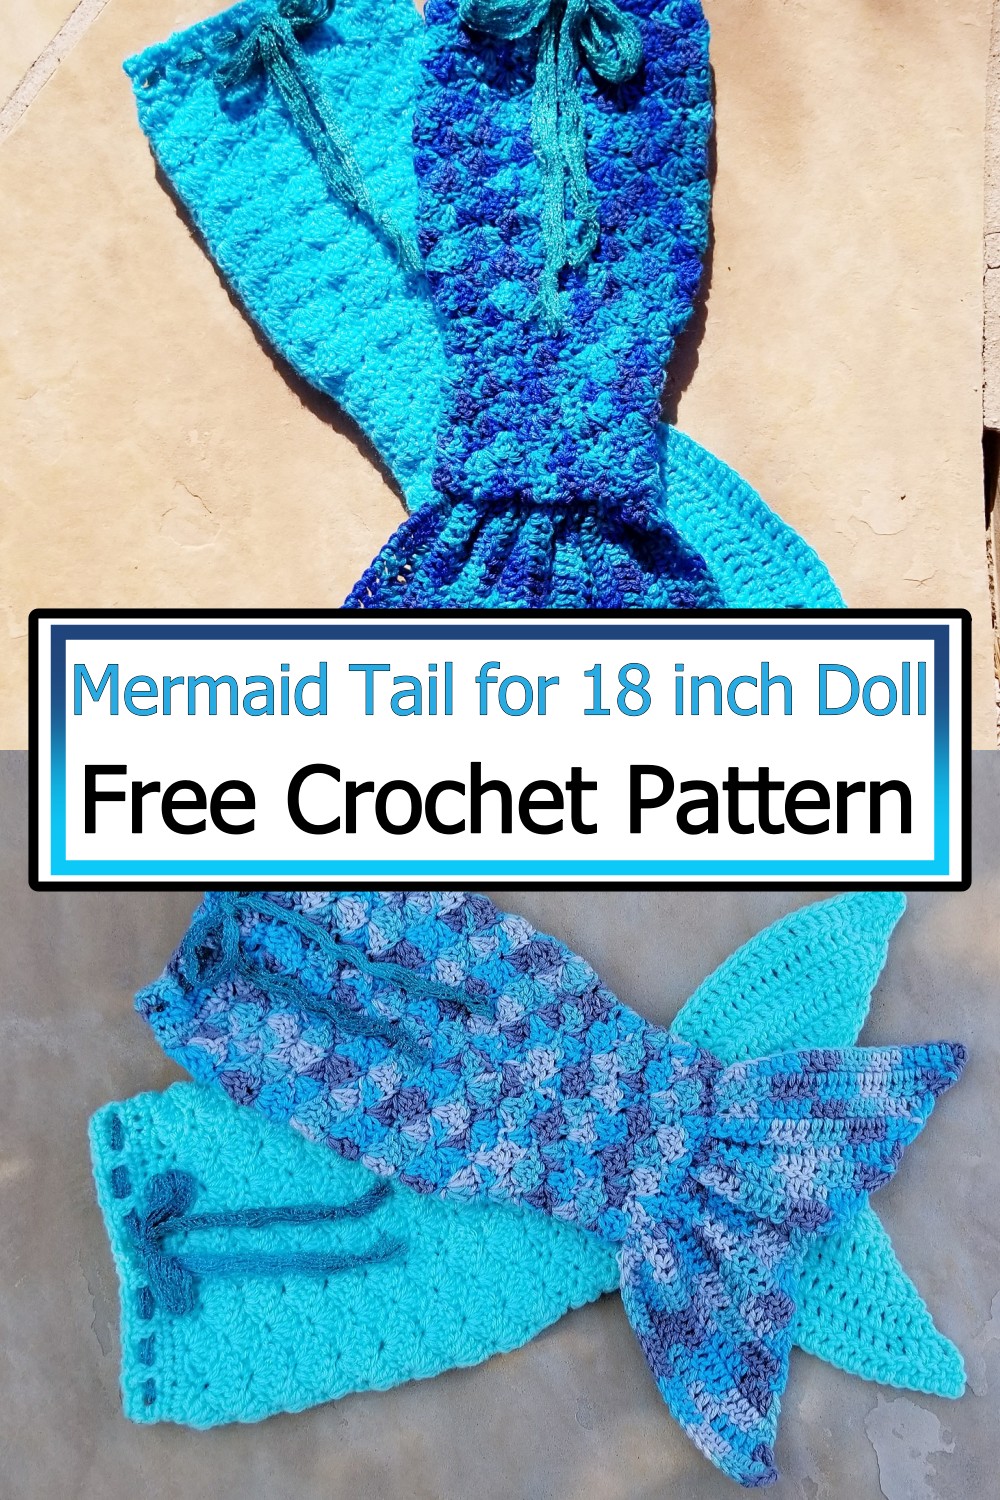 Mermaid Tail for 18 inch Doll